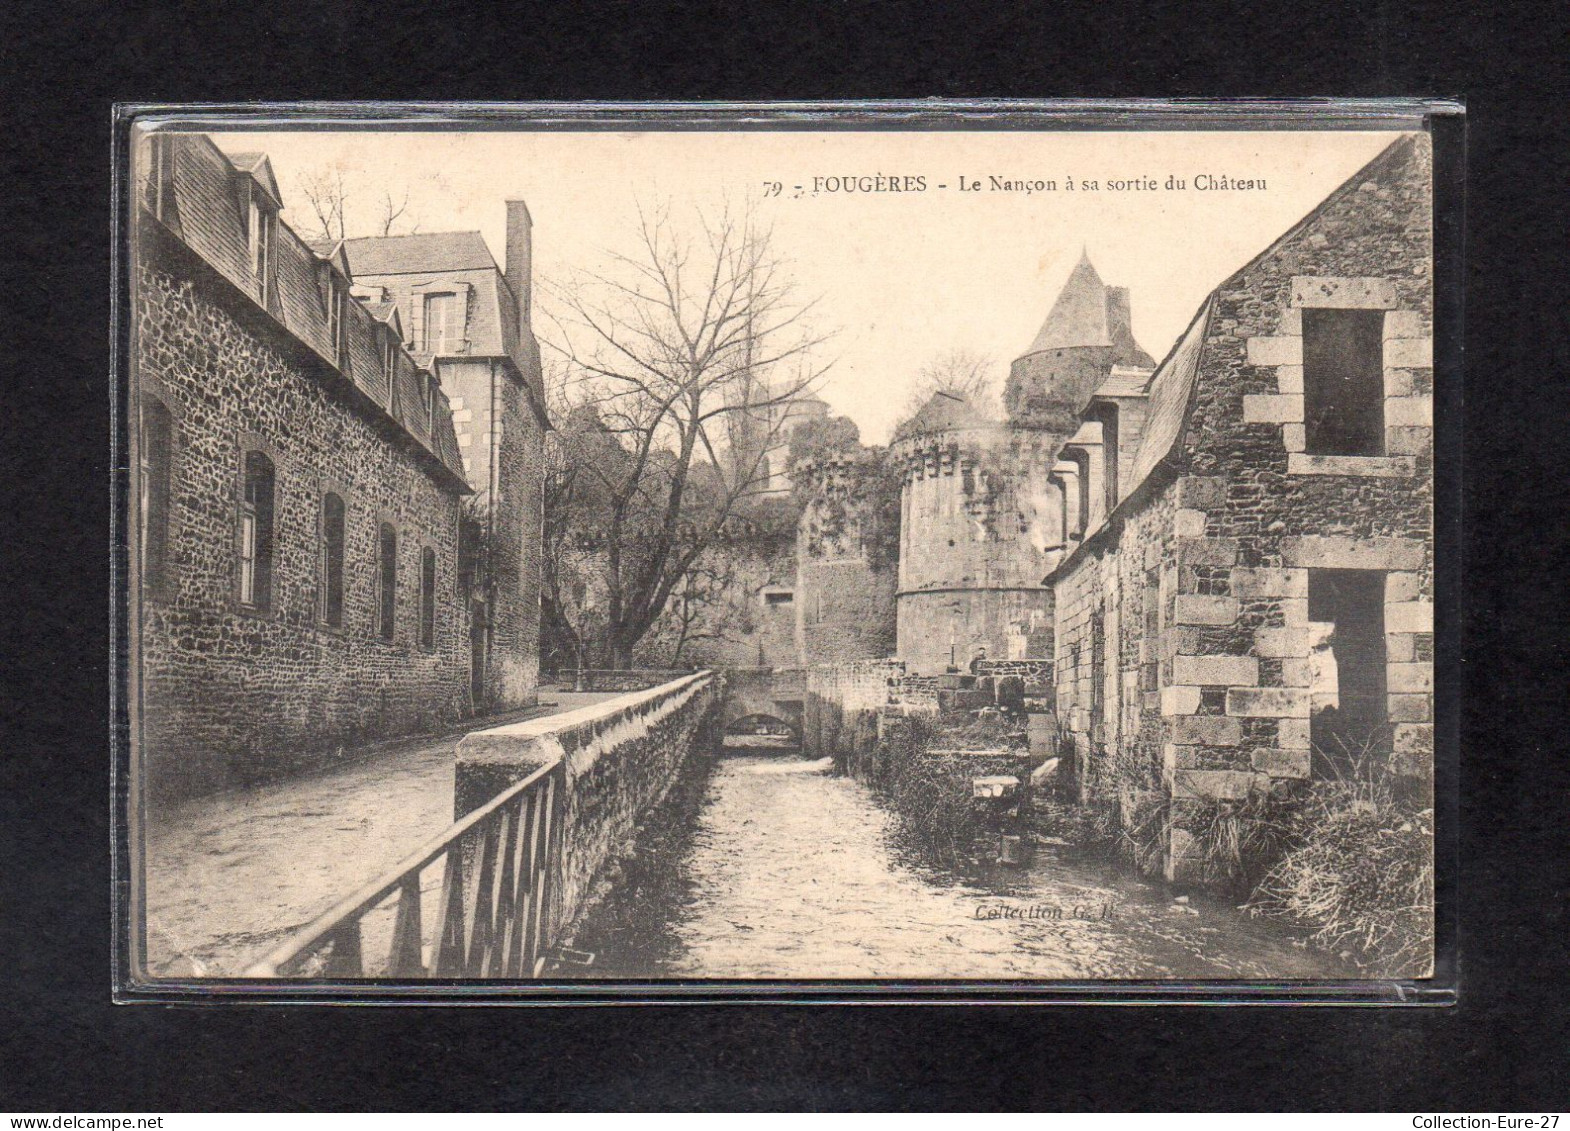 (29/03/24) 35-CPA FOUGERES - Fougeres